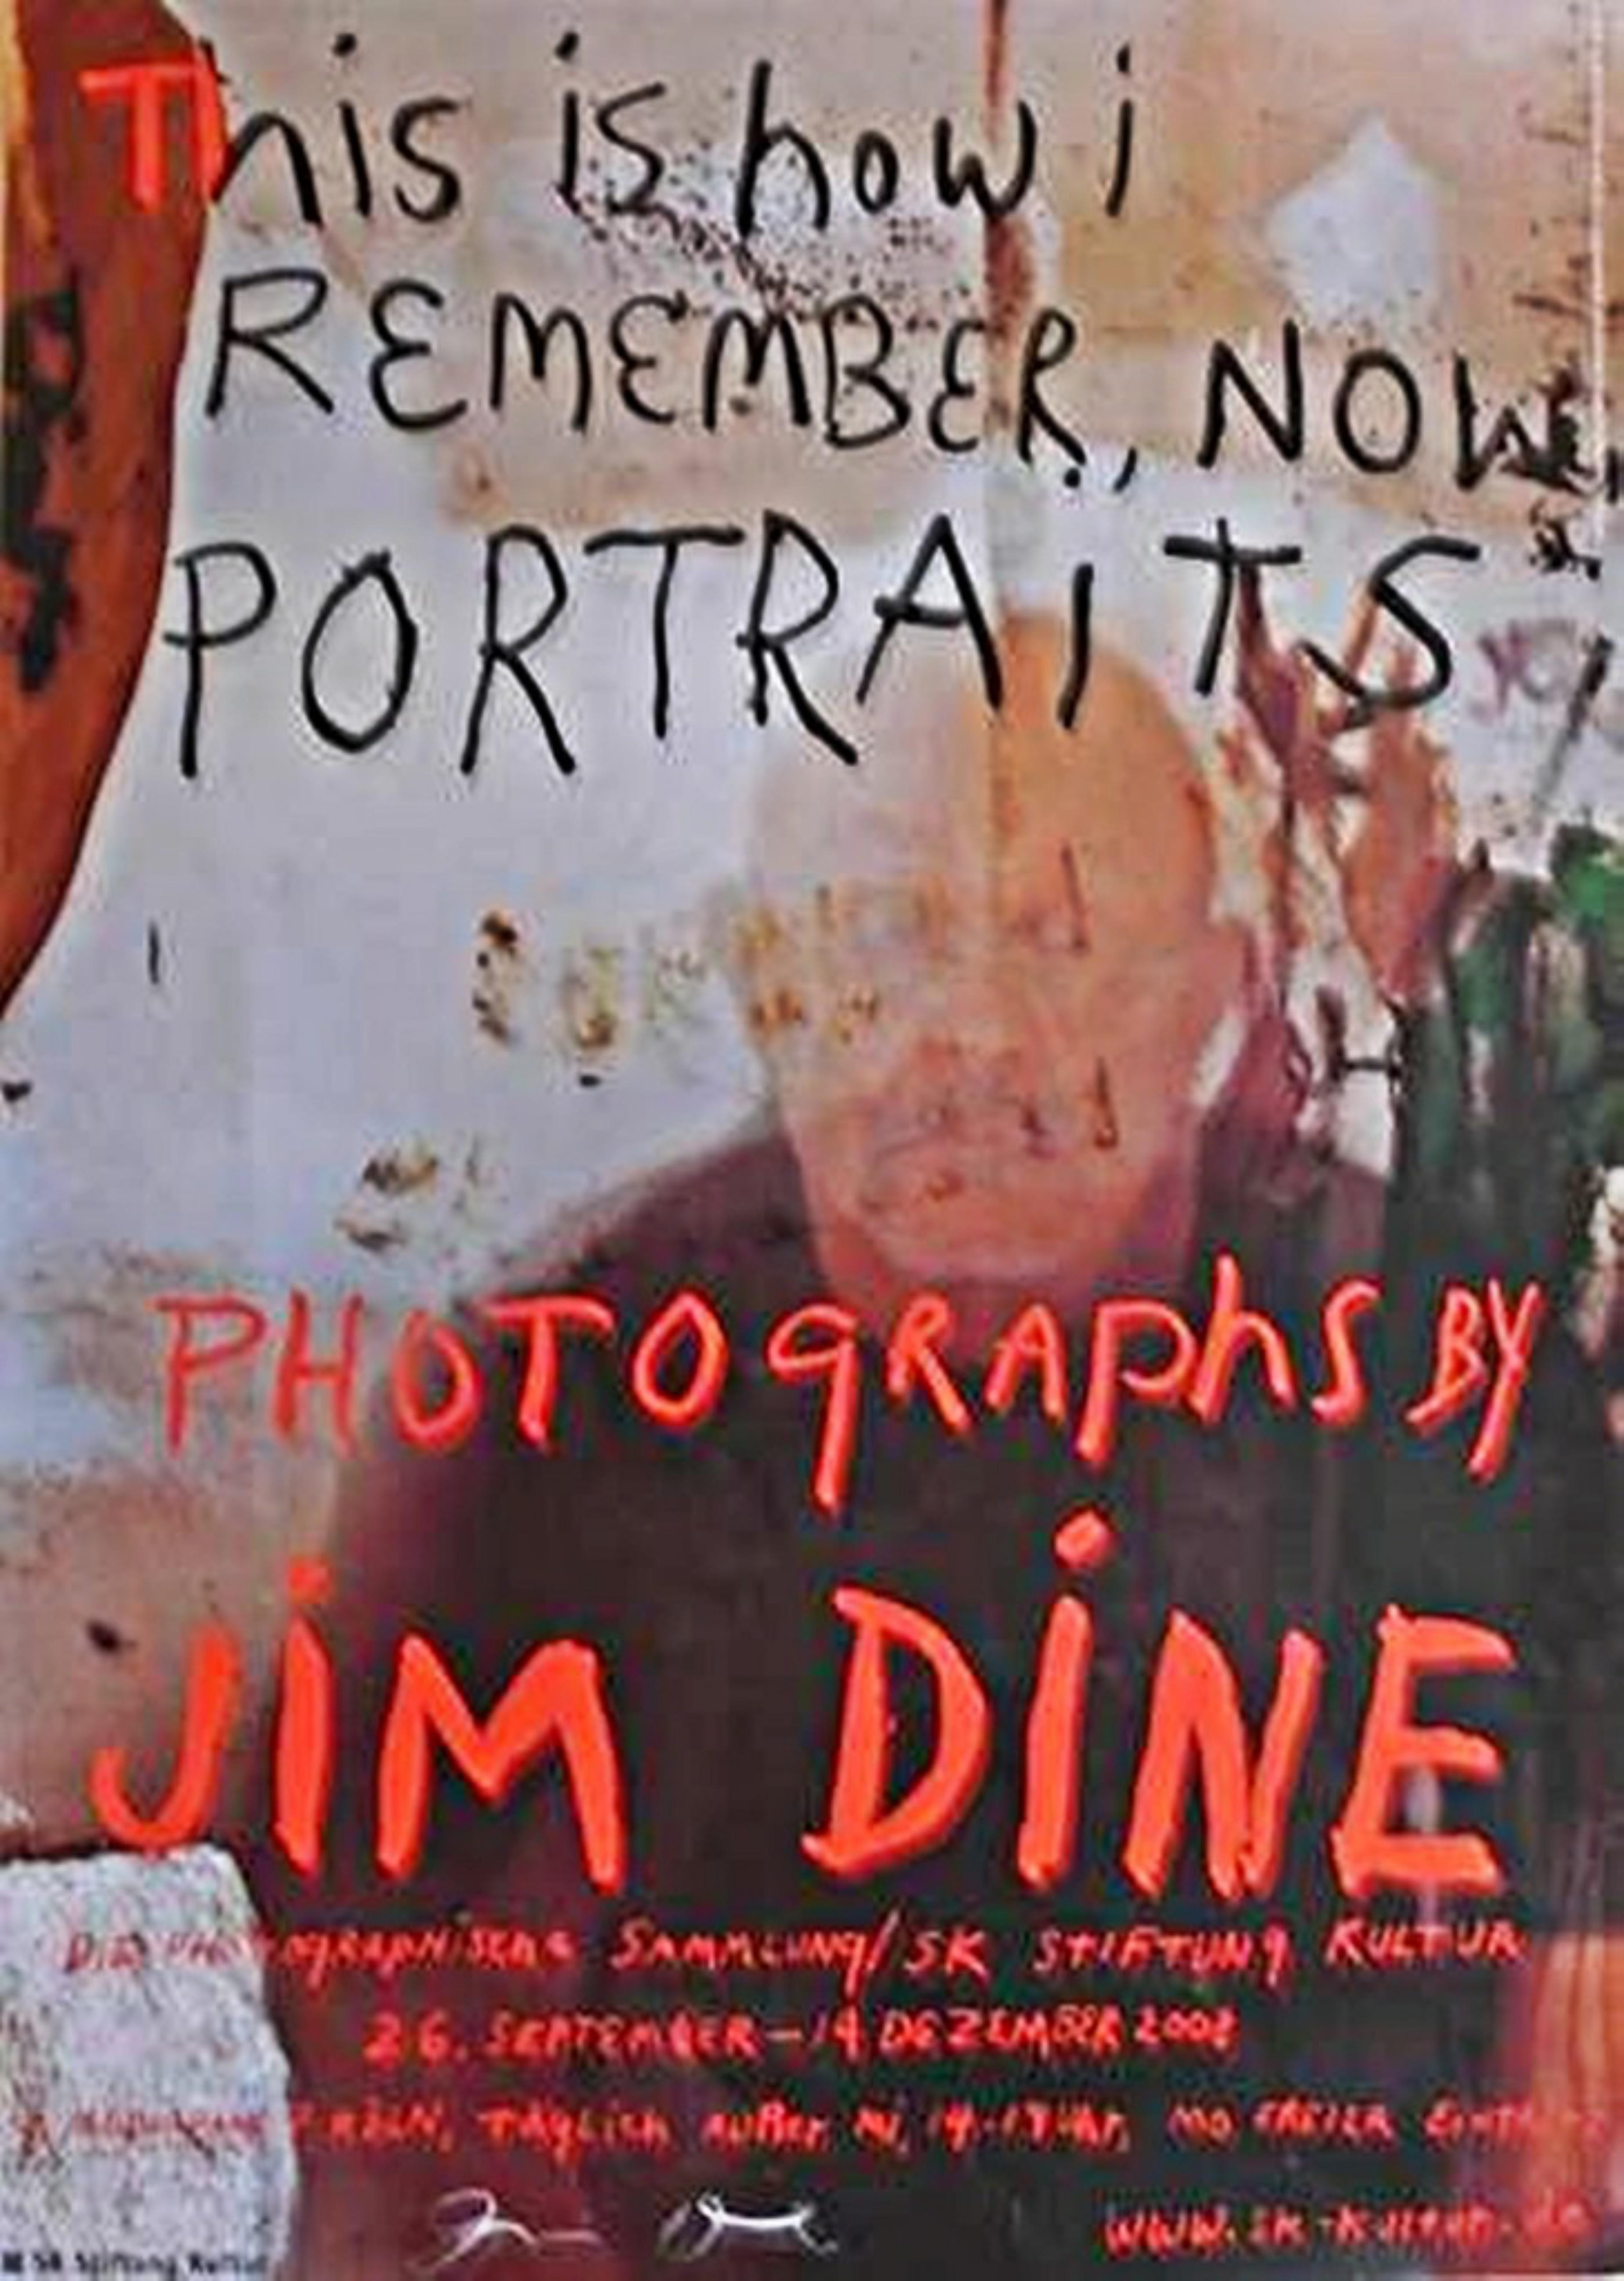 Danish exhibition poster for "Photographs by Jim Dine" (hand signed by Jim Dine)